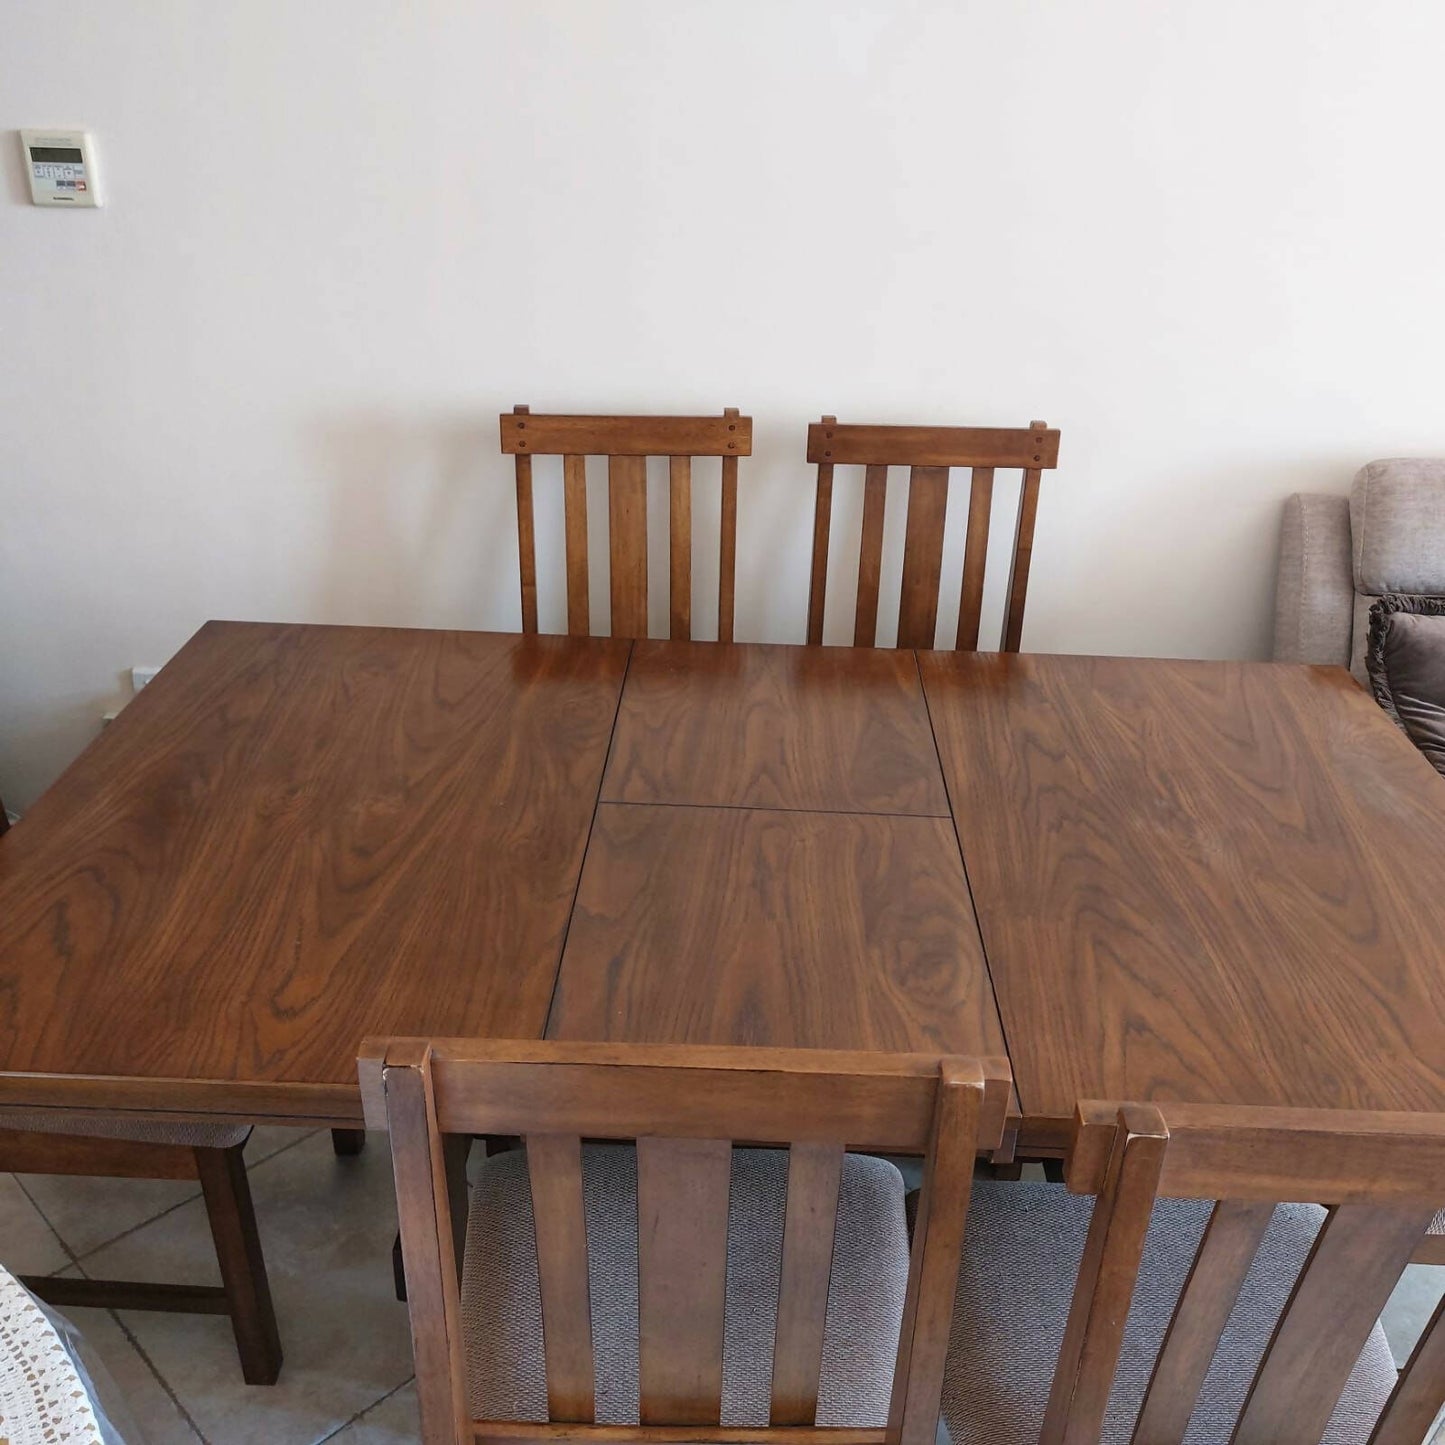 6 seater extendable dining table set